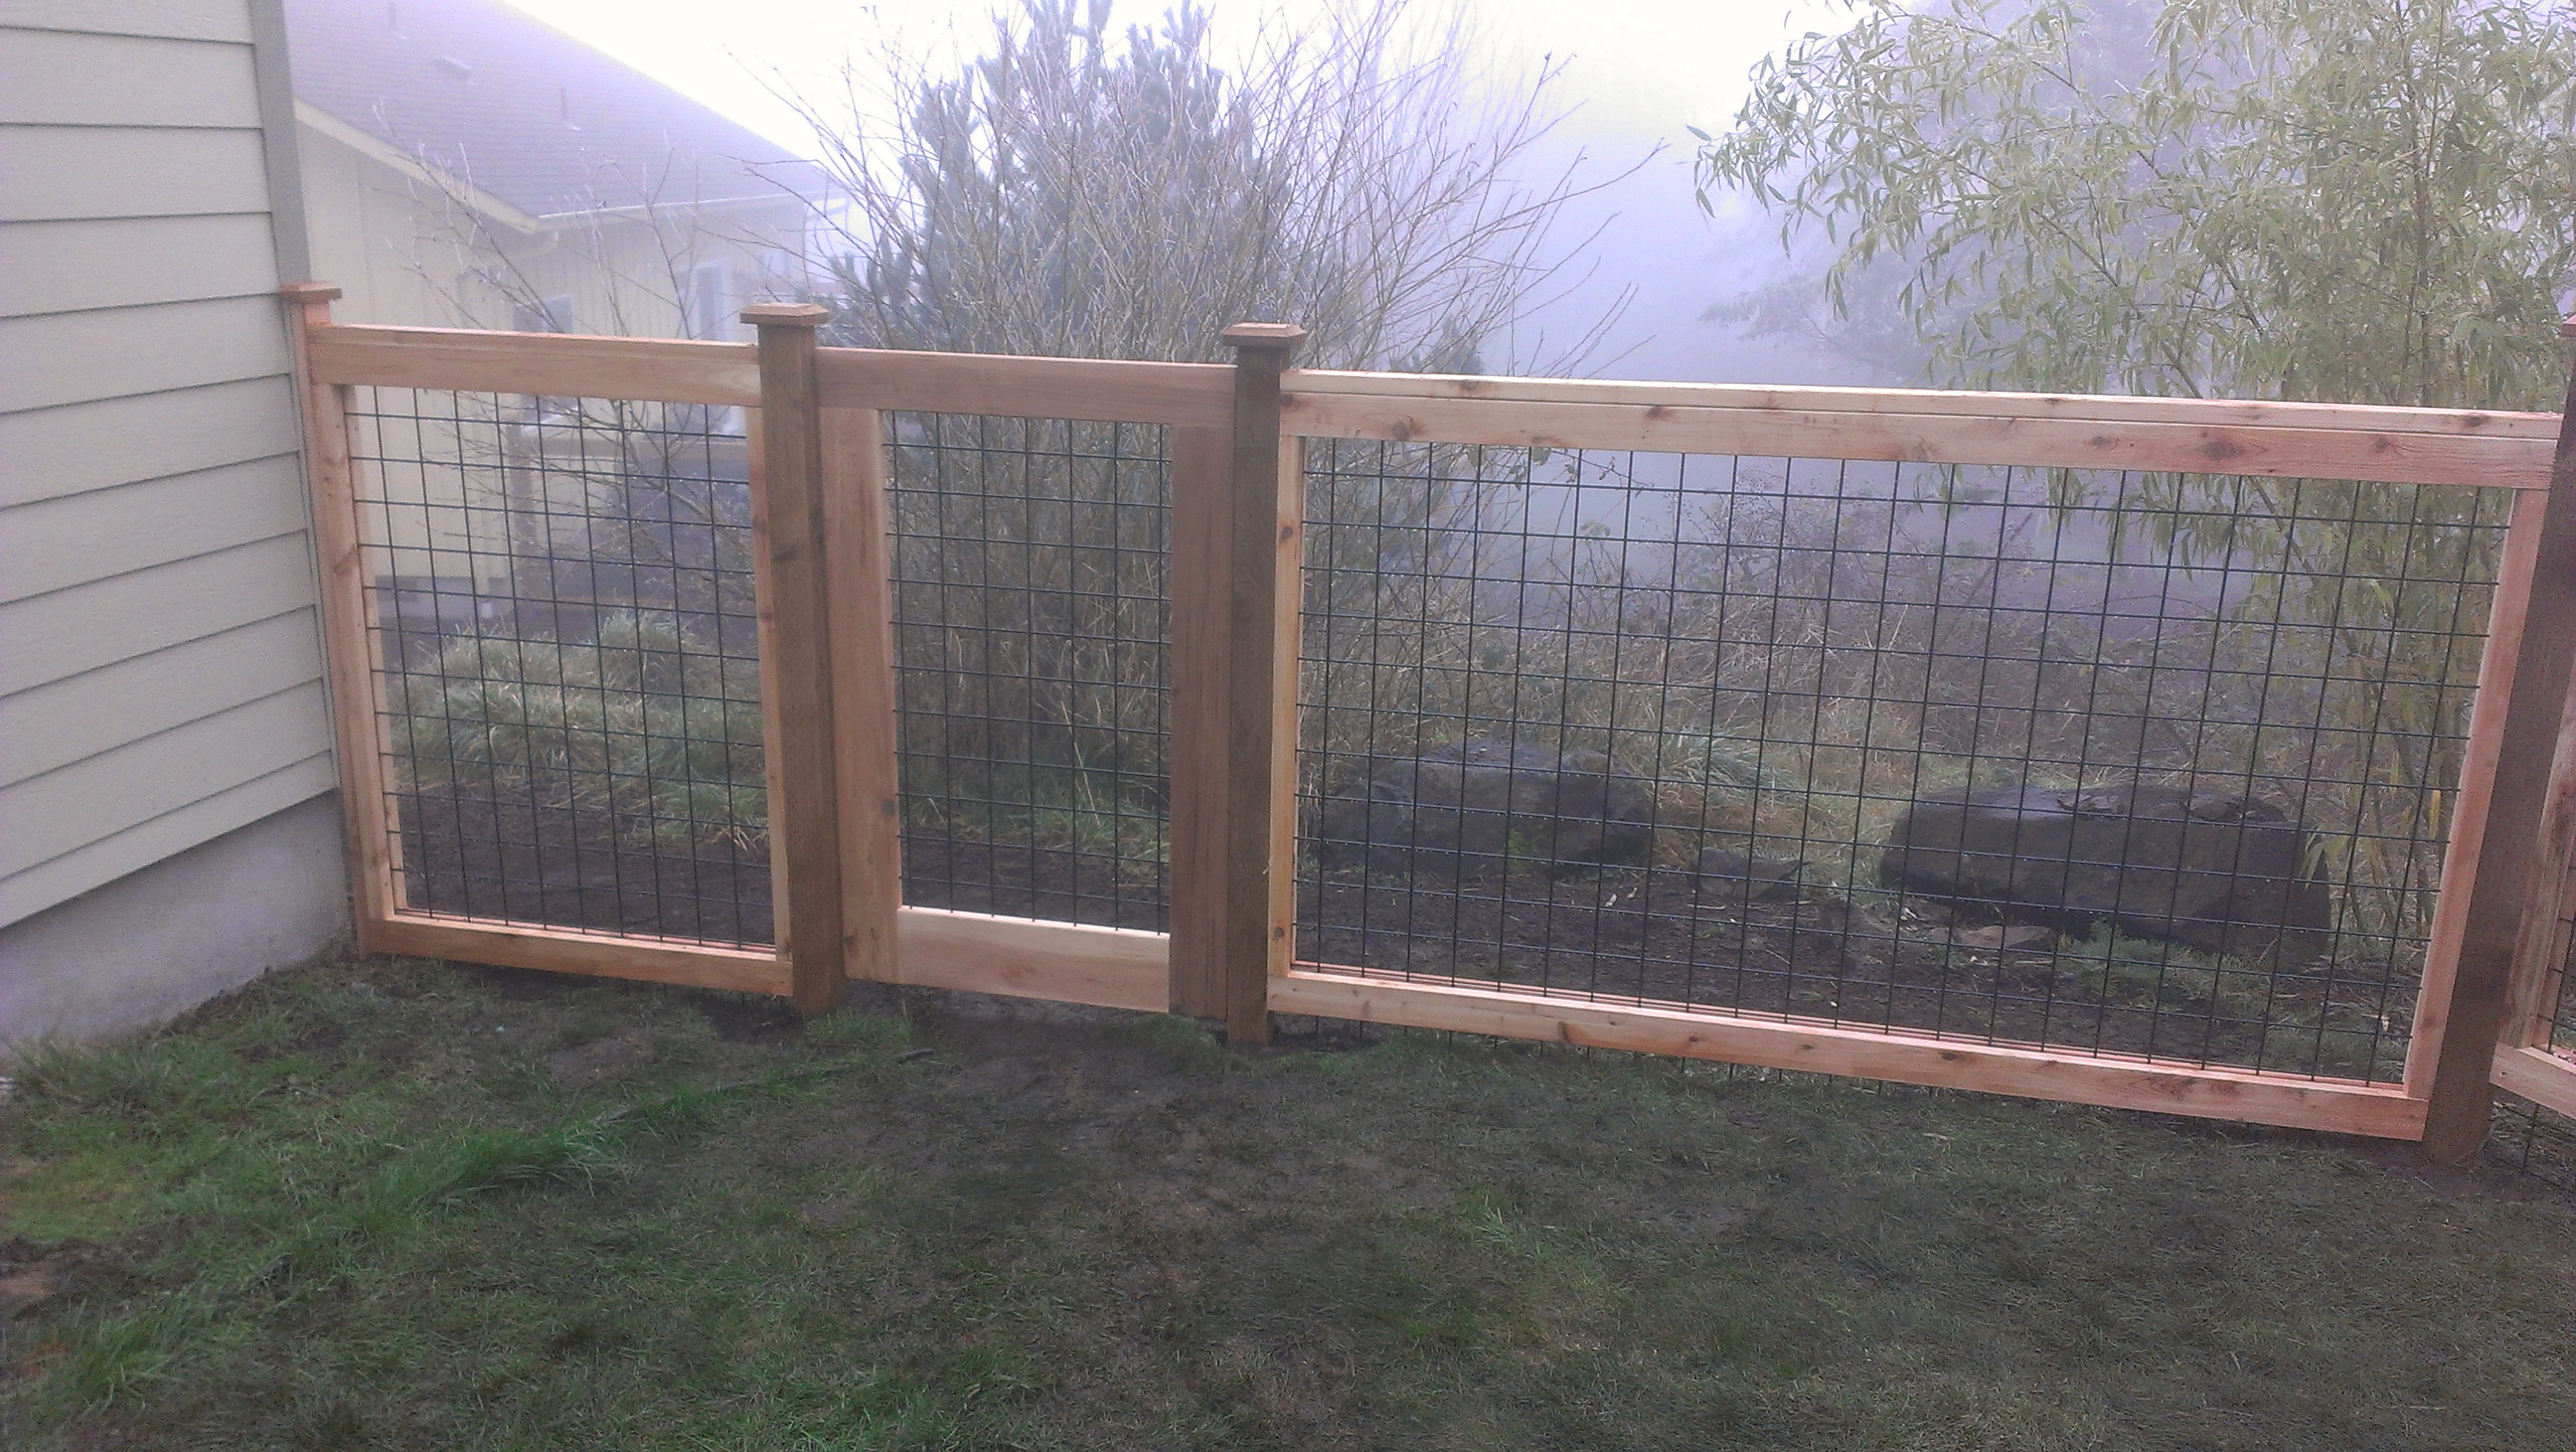 Phils Powder Coated Wire Grid Fence And Gates Black Diamond Fencing within dimensions 3264 X 1840